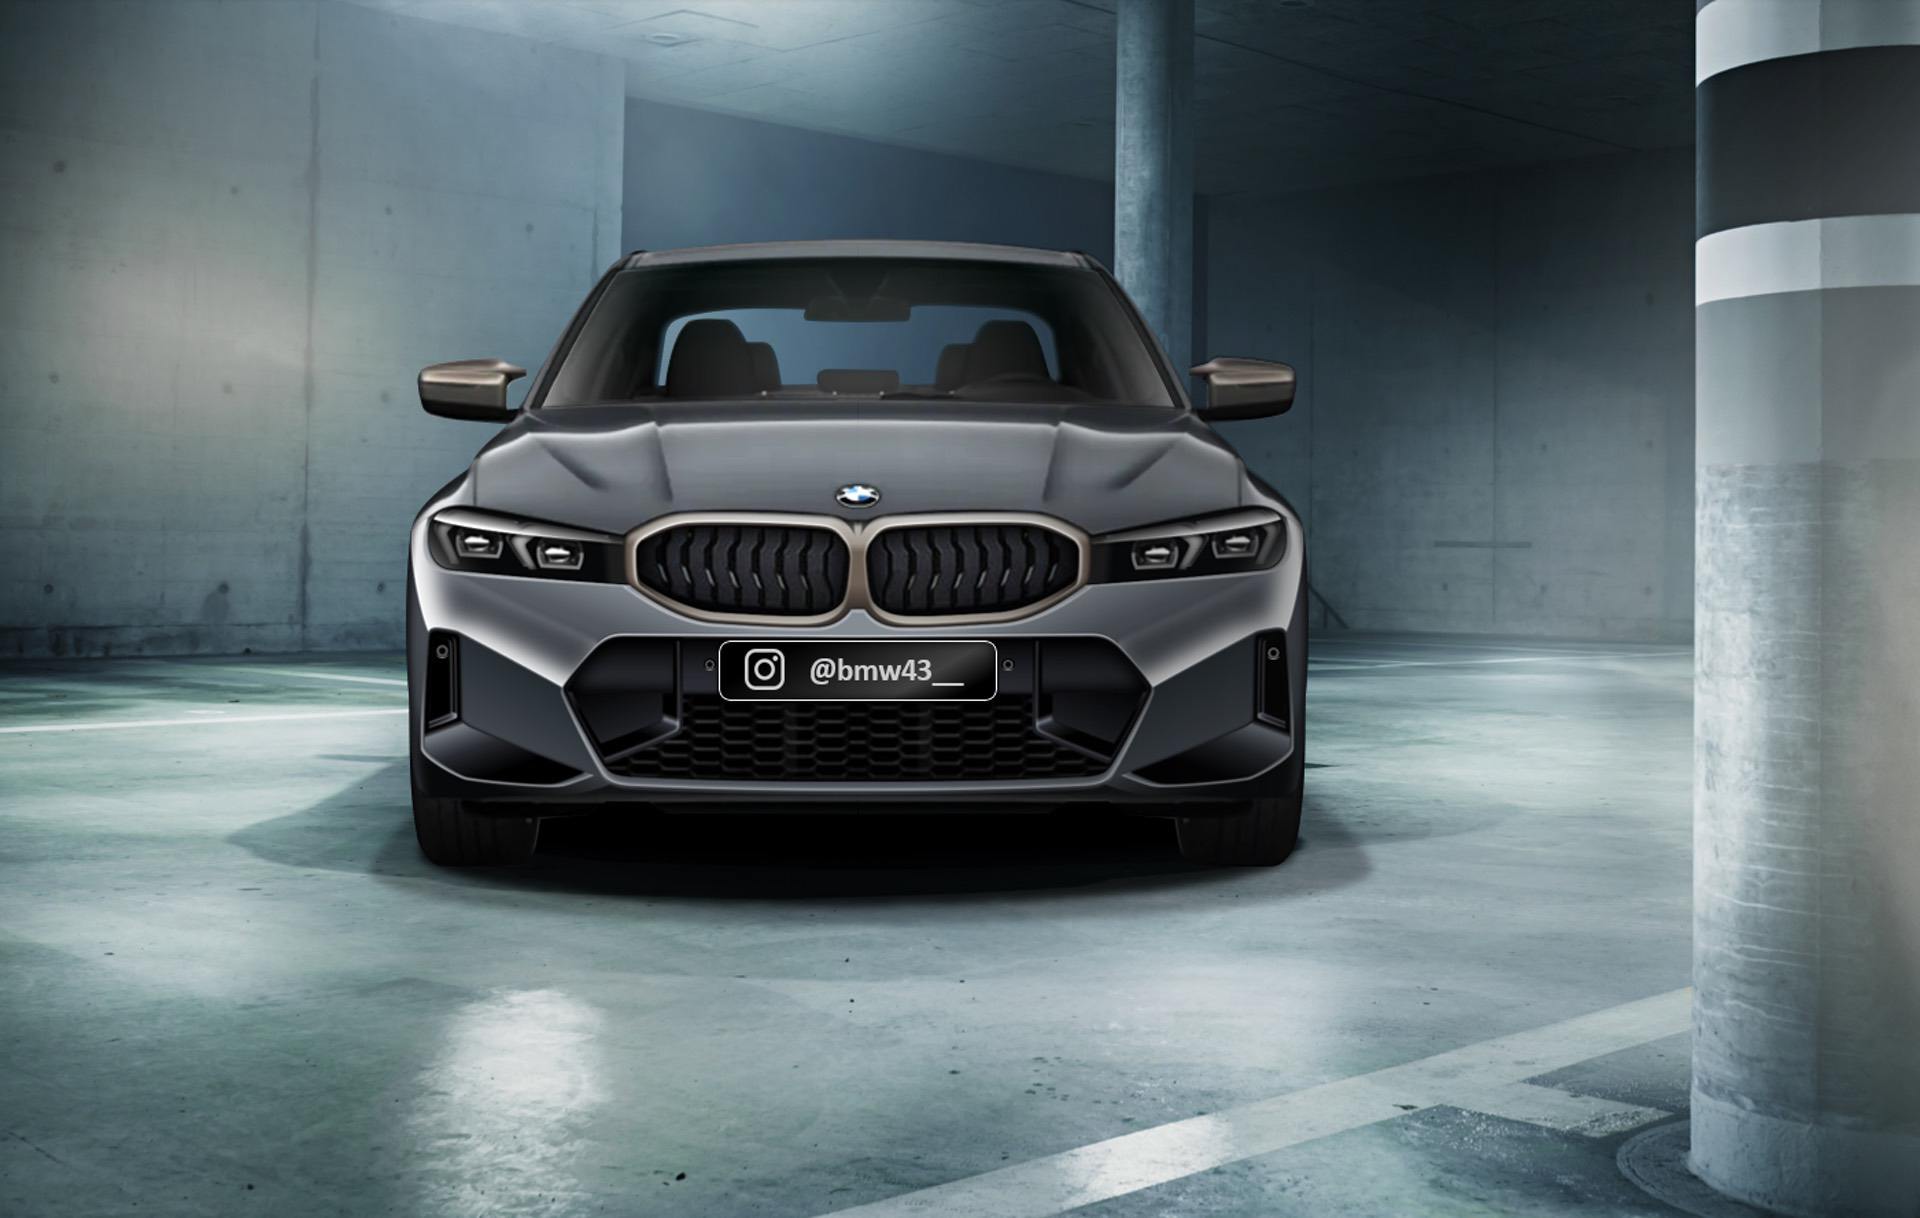 2022 BMW 3 Series Facelift rendered based on the leaked image